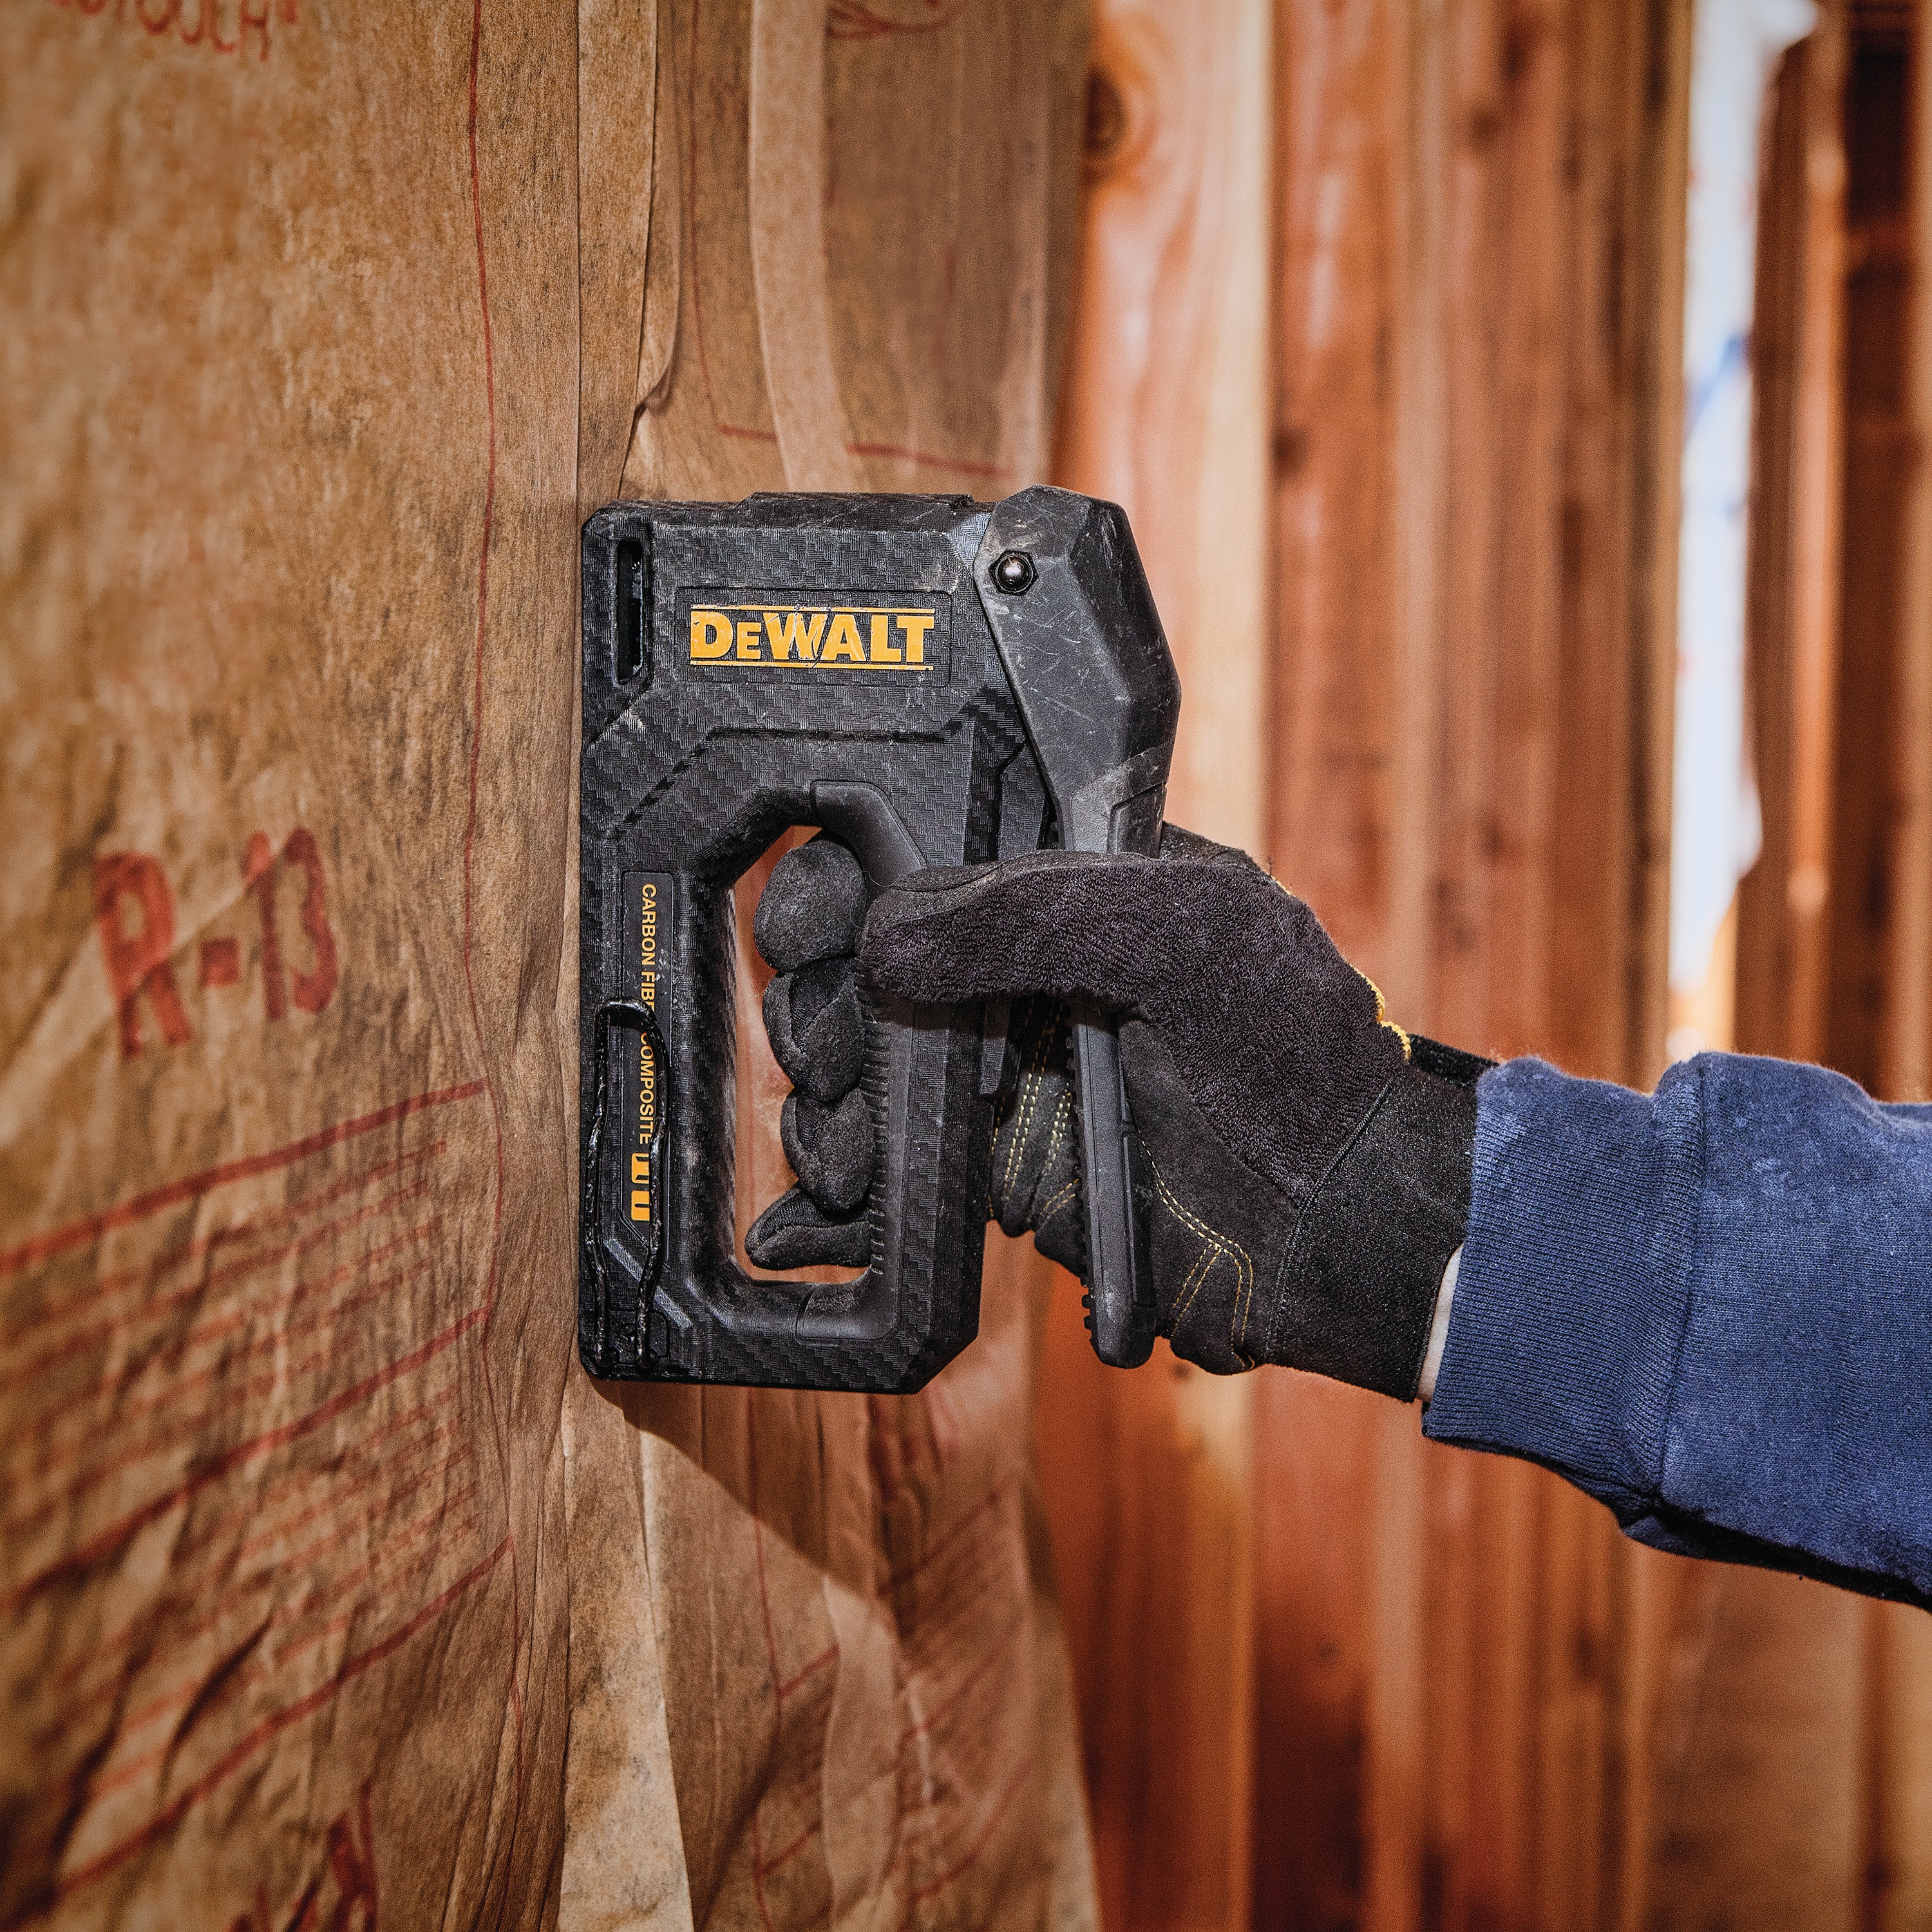 Carbon Fiber Composite Staple Gun being used to staple underlay on  wall.